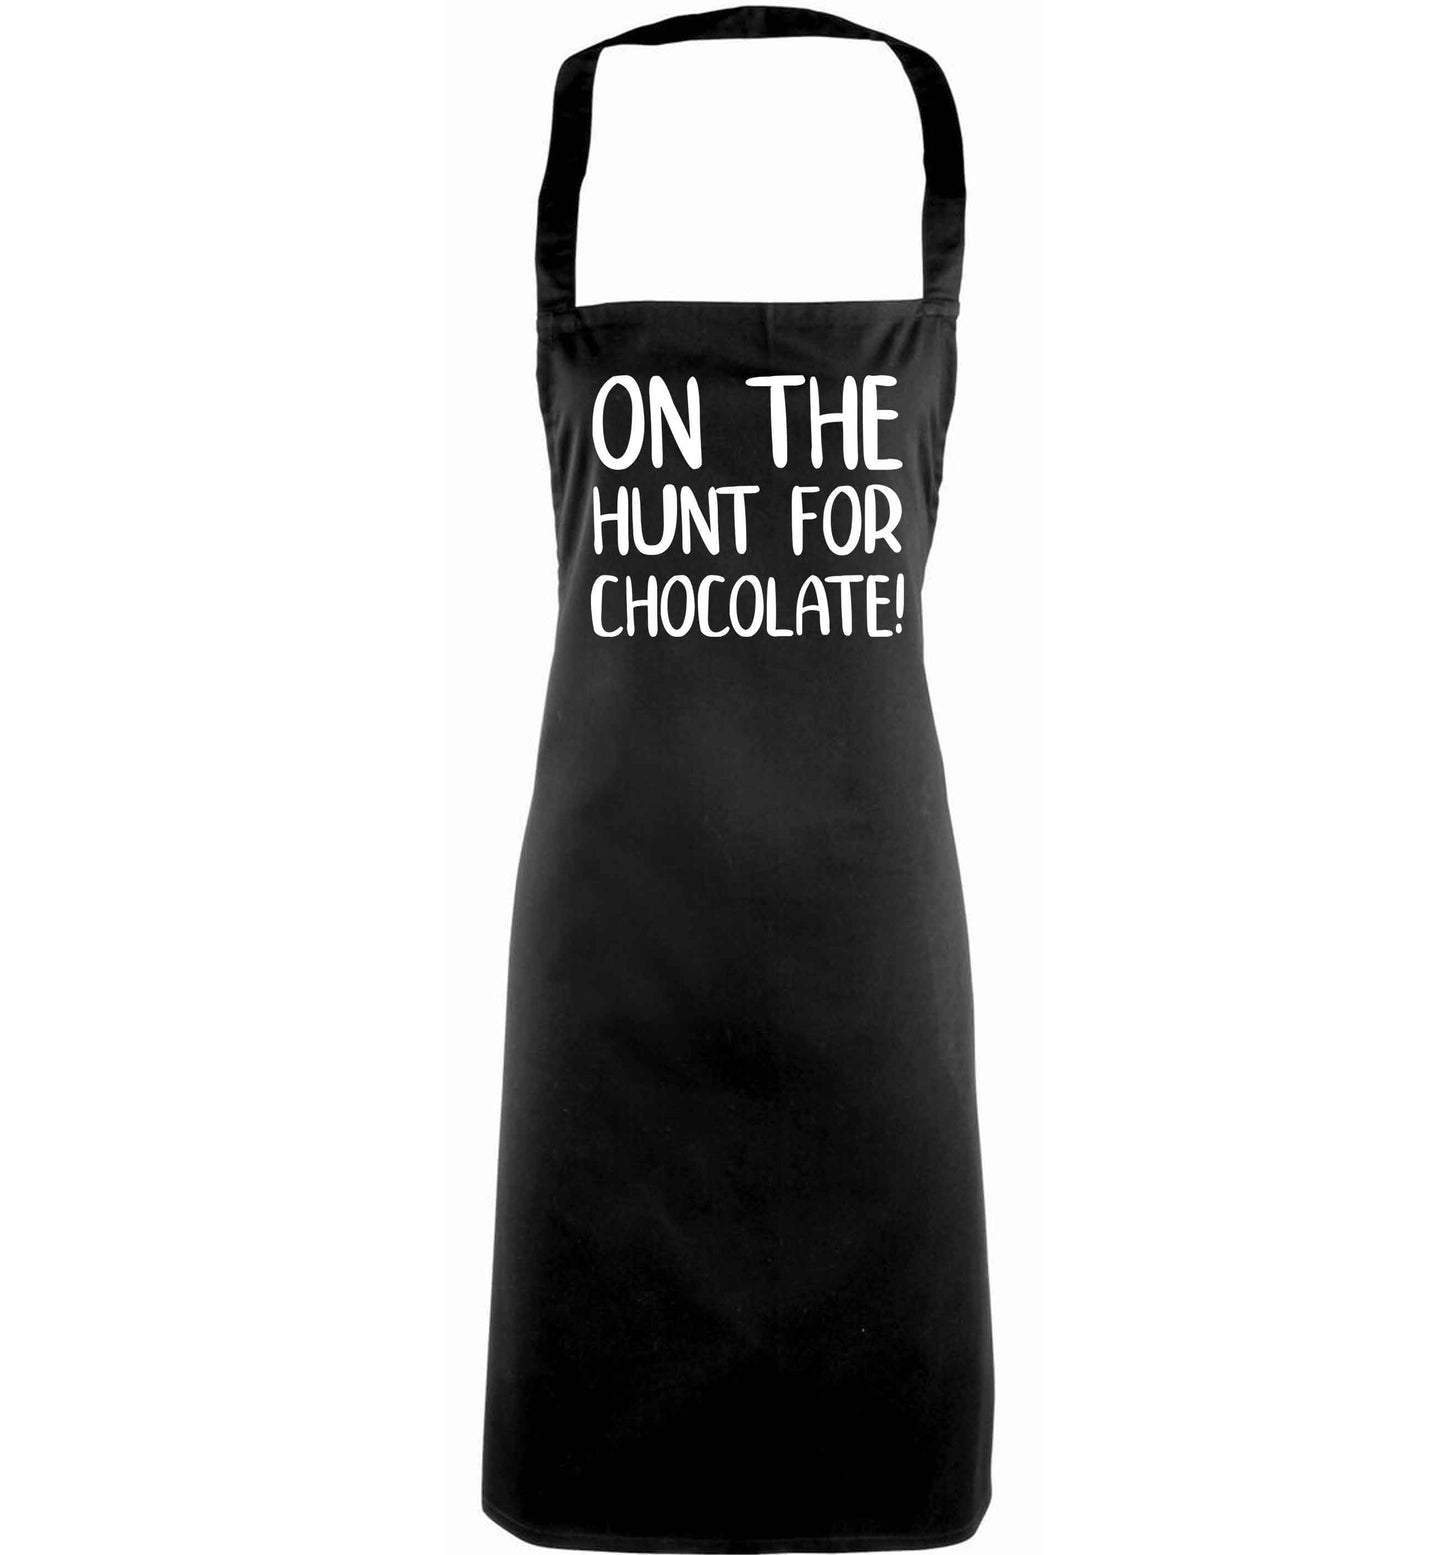 On the hunt for chocolate! adults black apron